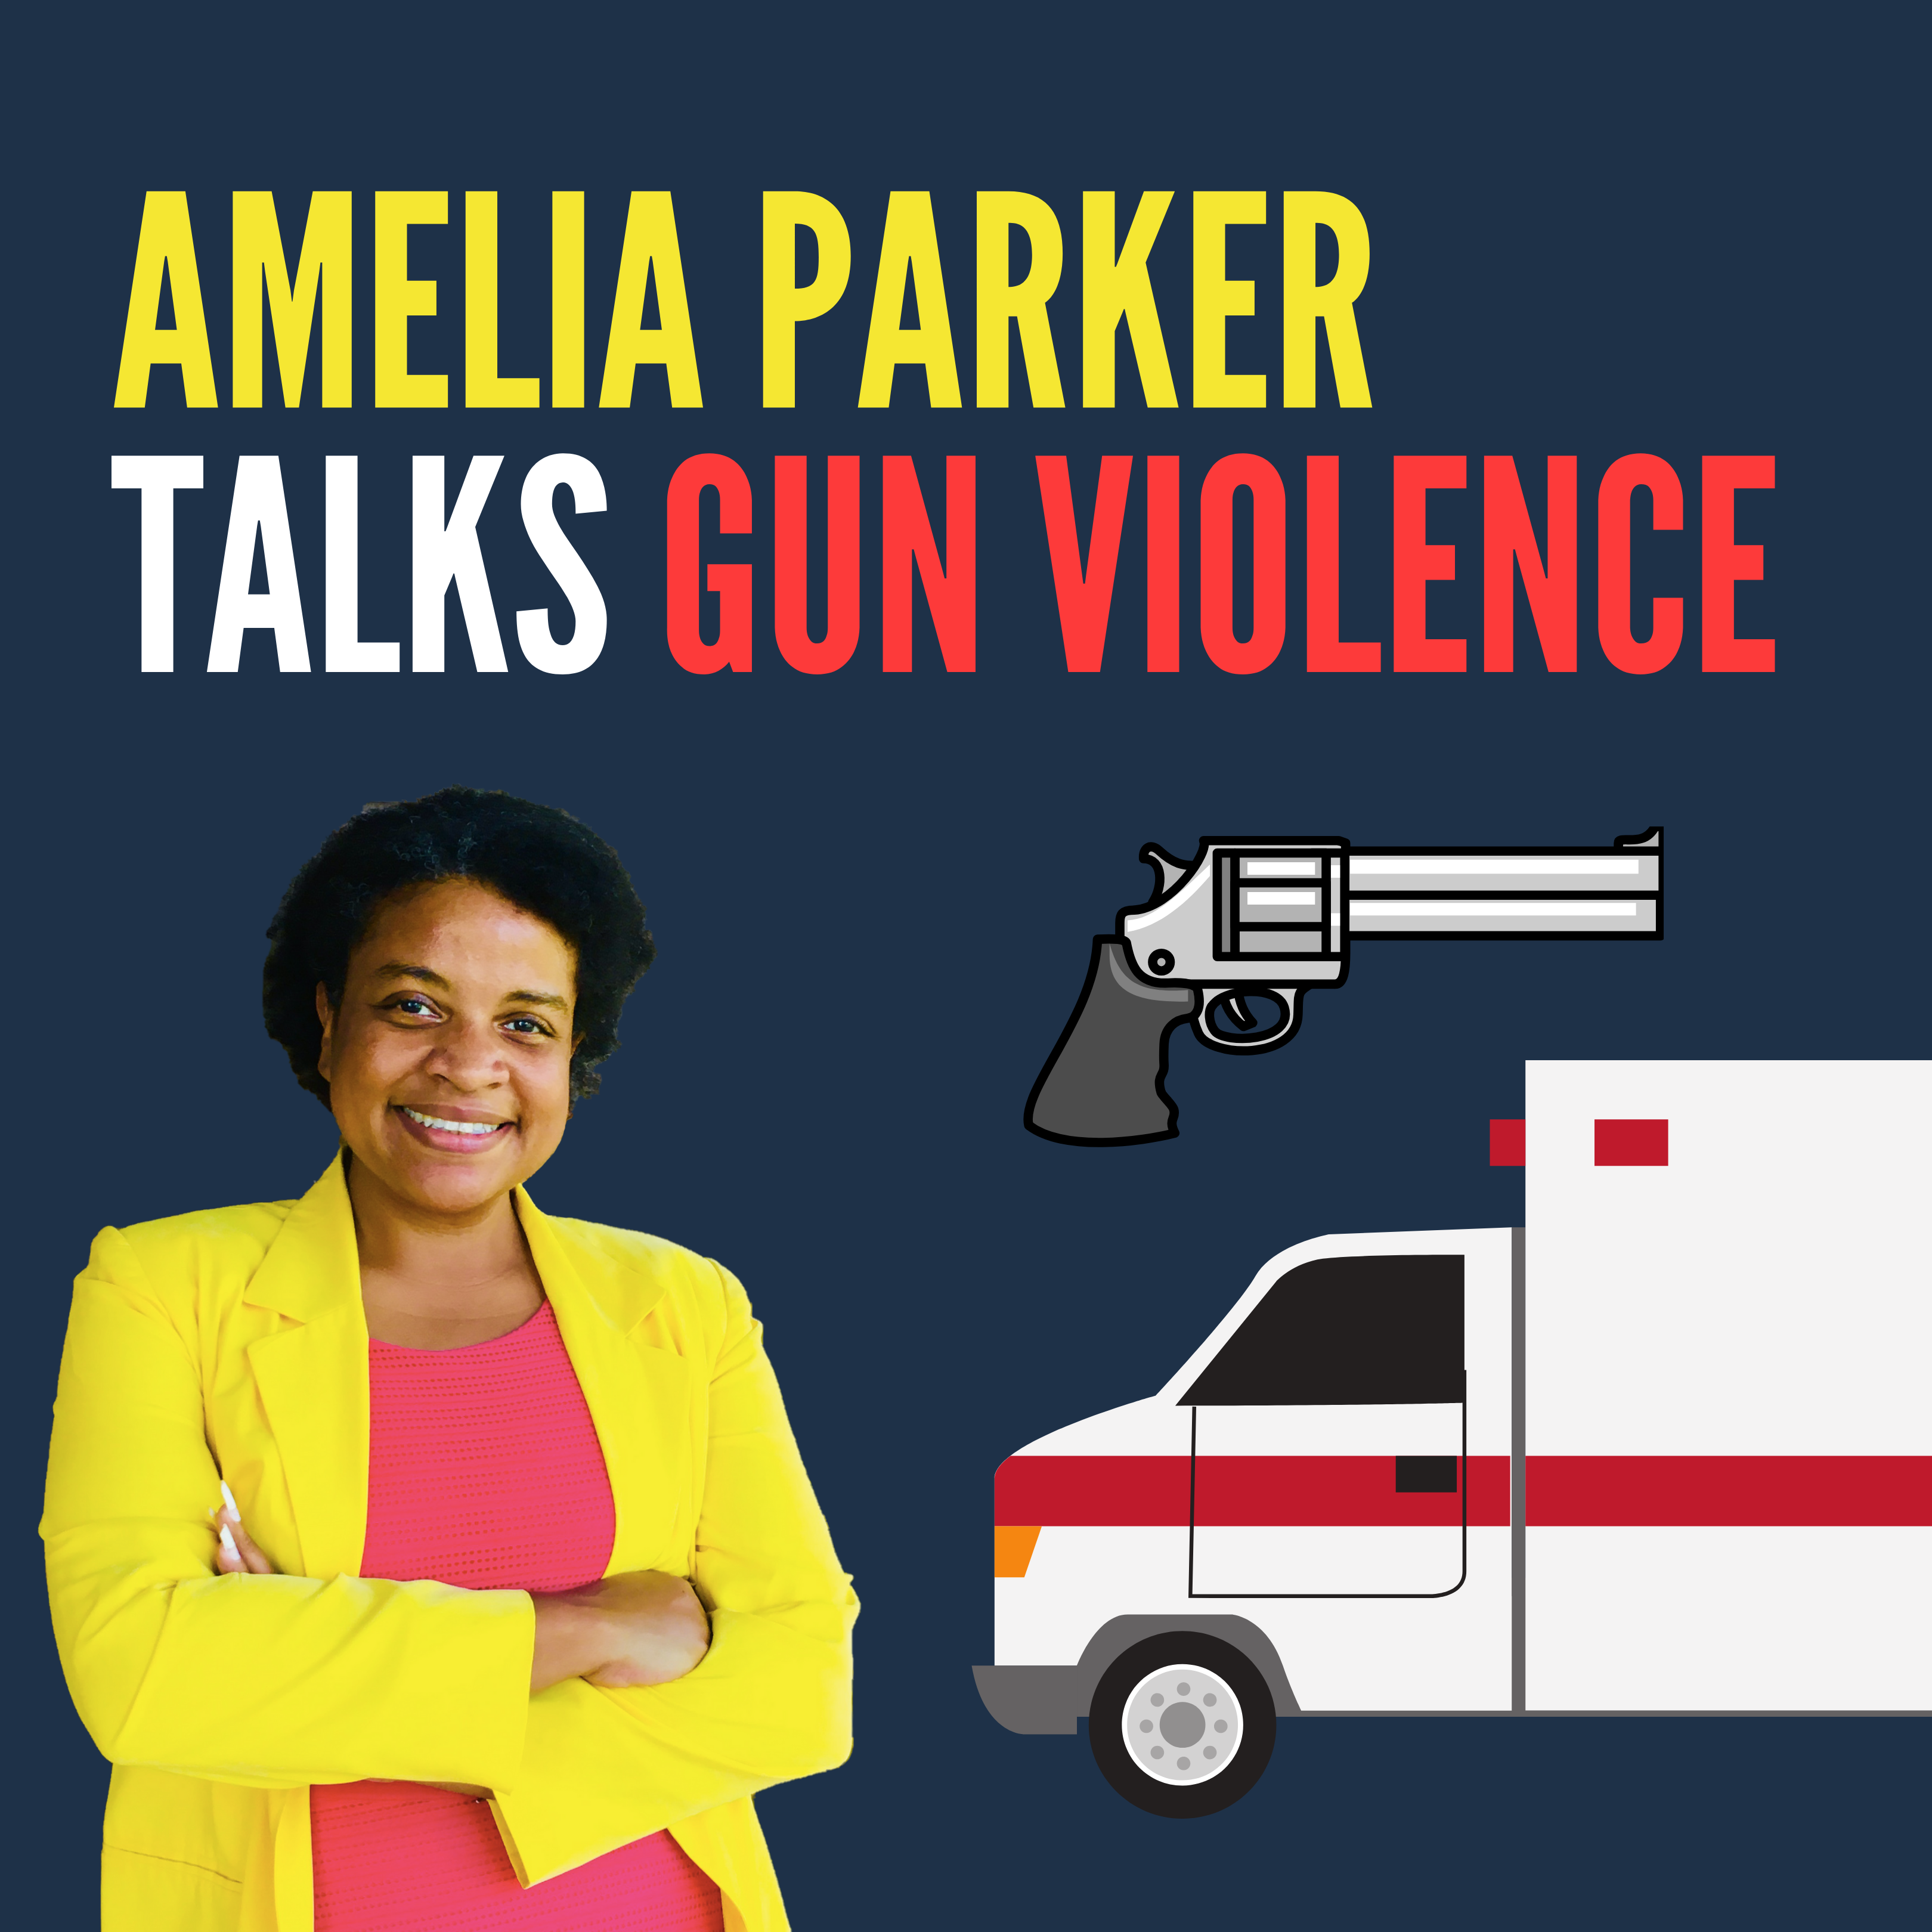 As a member of city council, I would support initiatives that address the root causes of gun violence and work to build healthy and safe communities throughout our city. Gun violence is an overwhelming issue that requires a comprehensive response to the mental health challenges, lack of hope, disinvestment, poverty, among other issues, that create the conditions for gun violence in our communities.